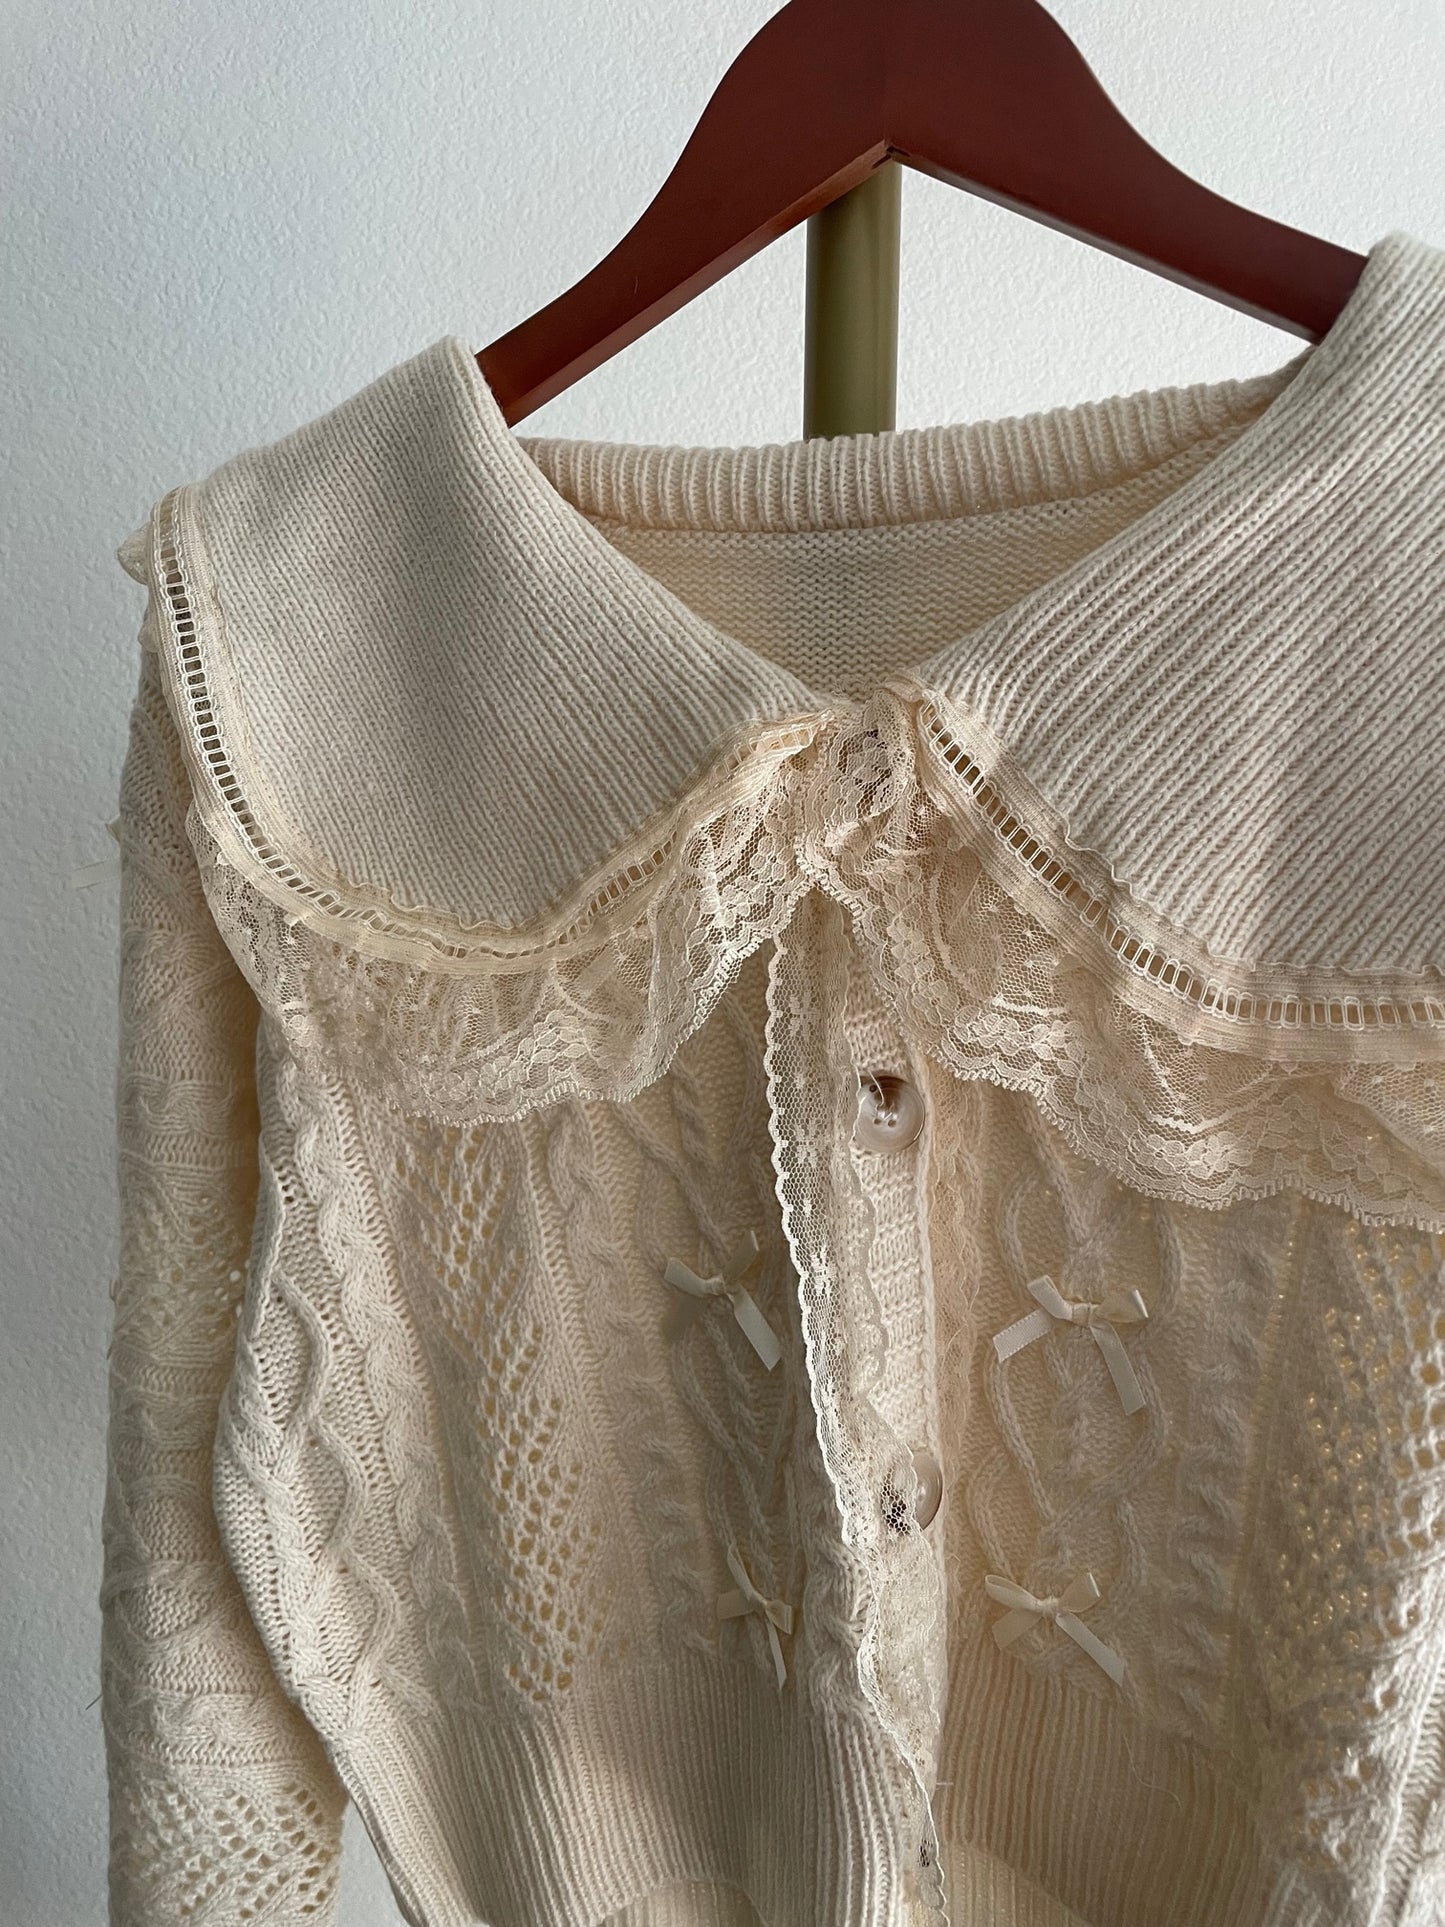 Lovely(Cute)♥ Lace Collar Cardigan Sweater 2 Colors